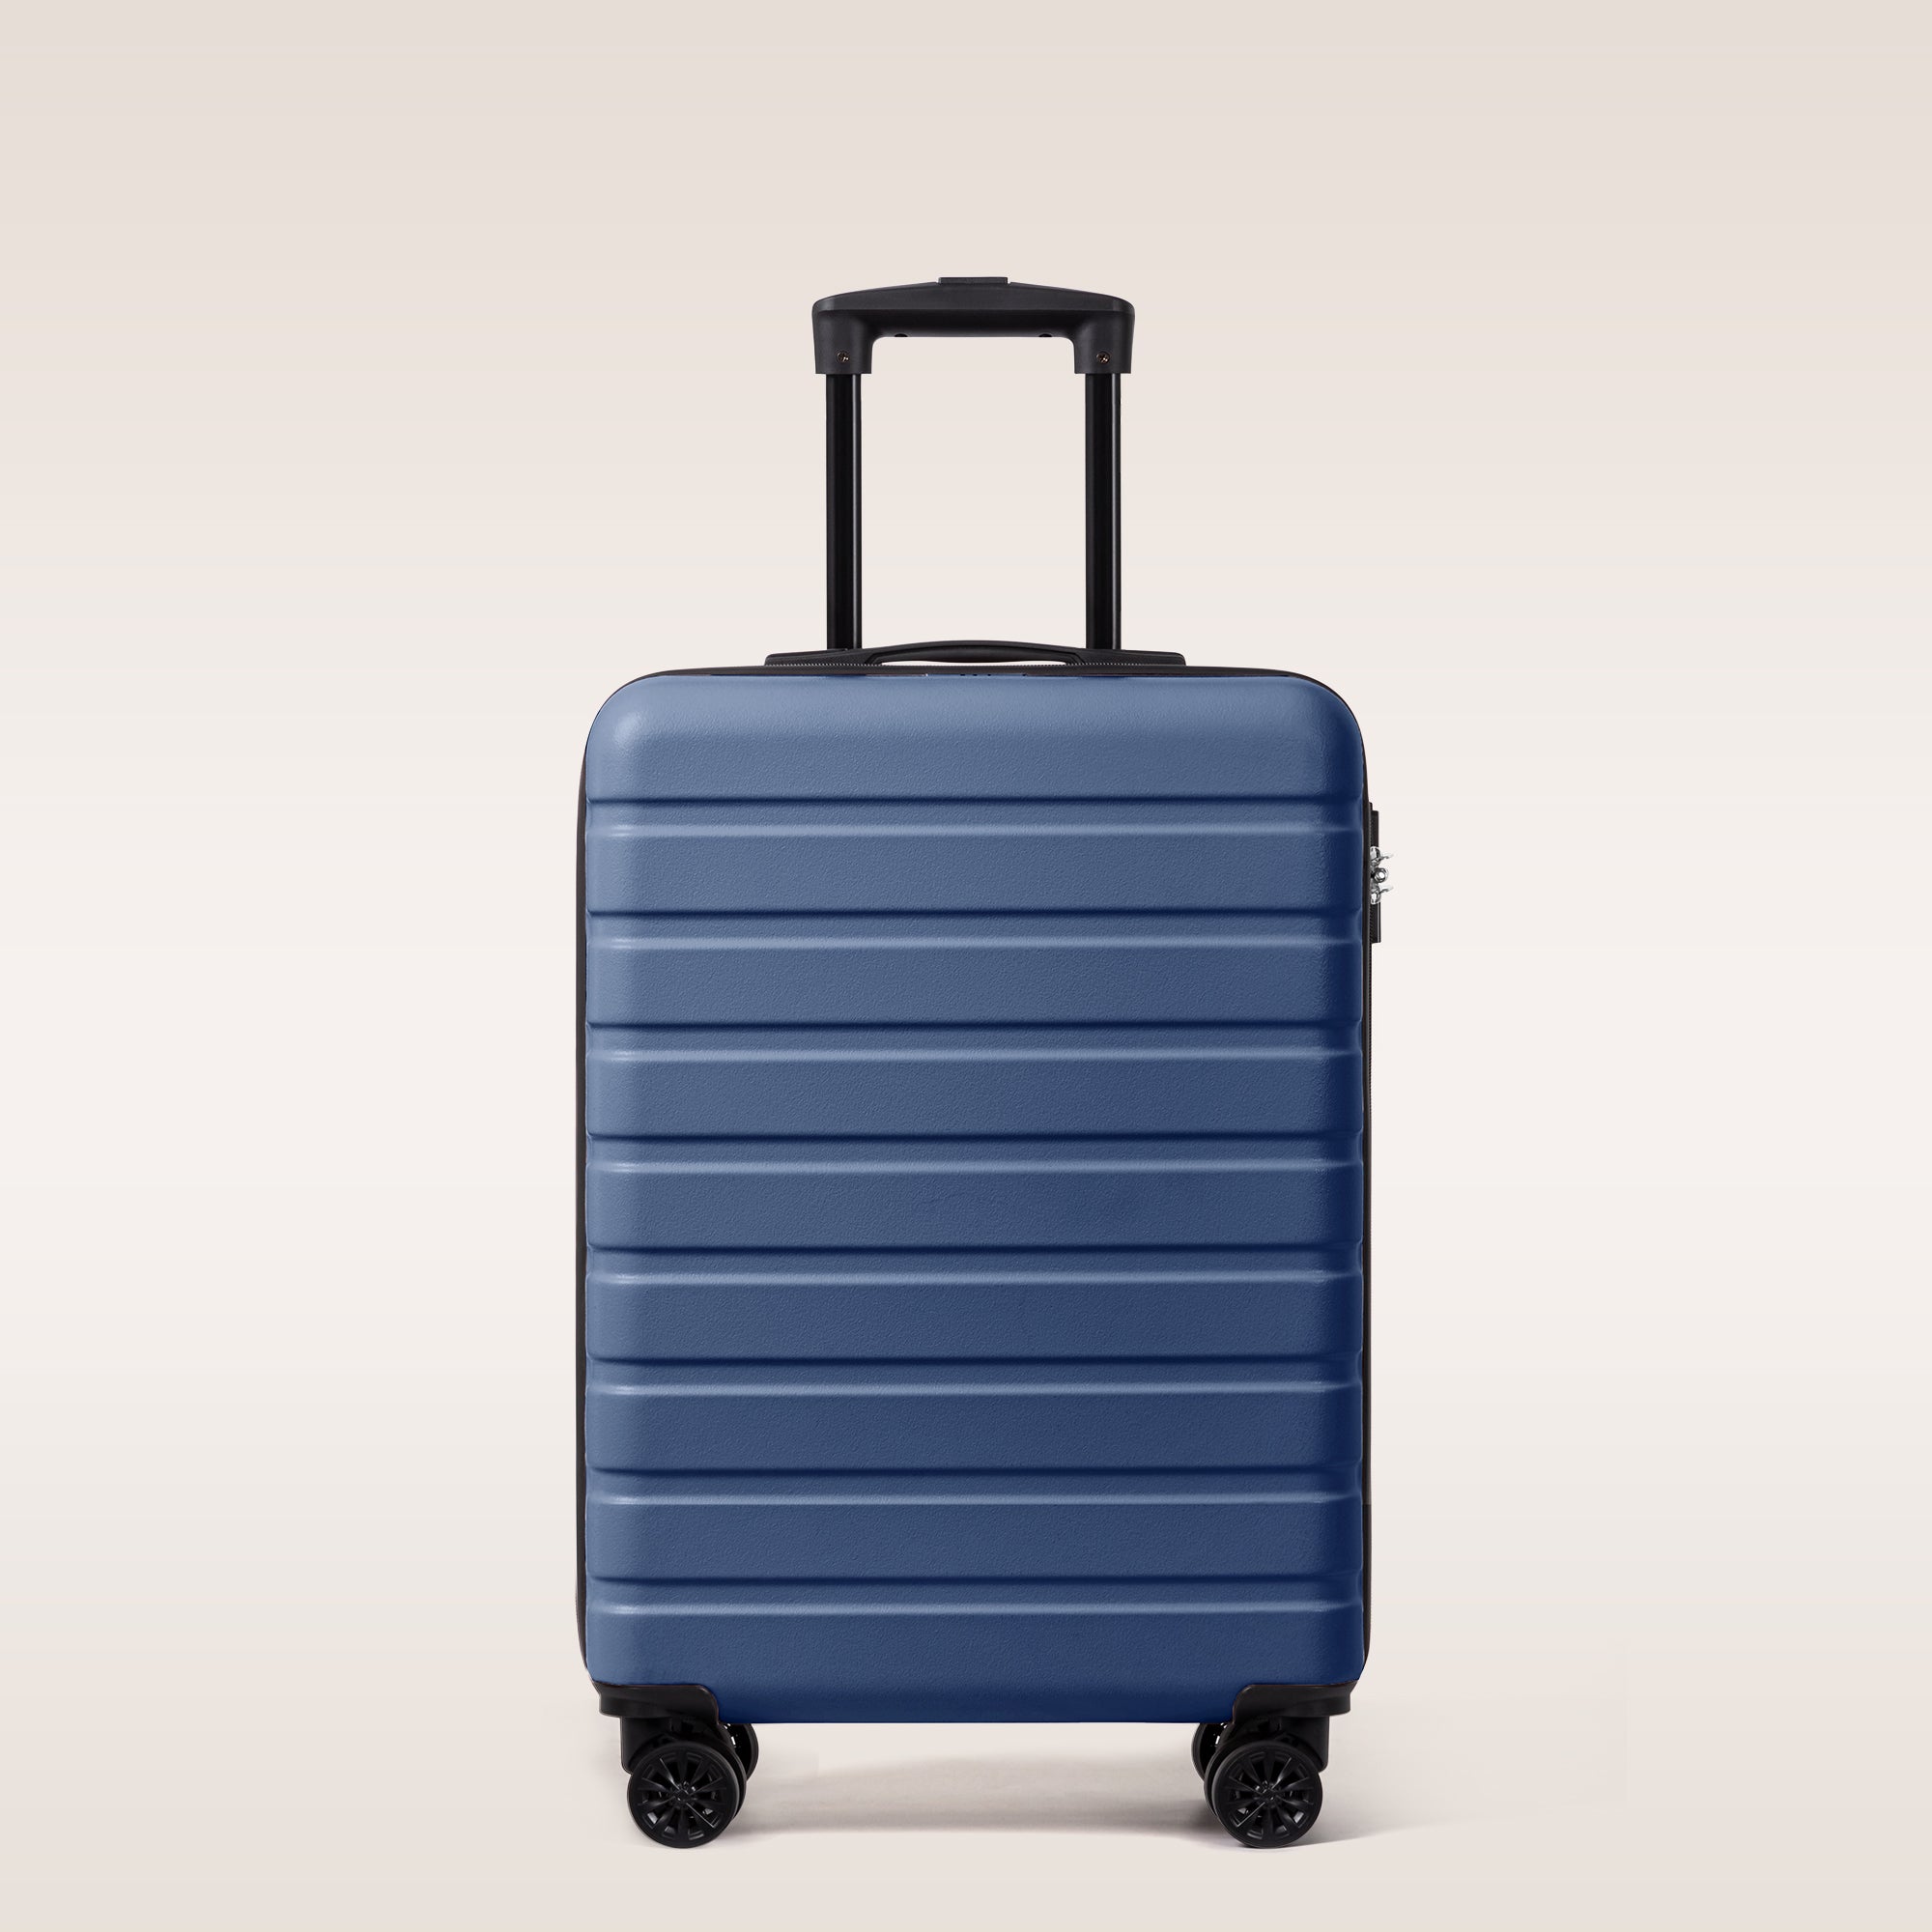 Best Carry-On Pro | Cabin Size AnyZip Travel Luggage